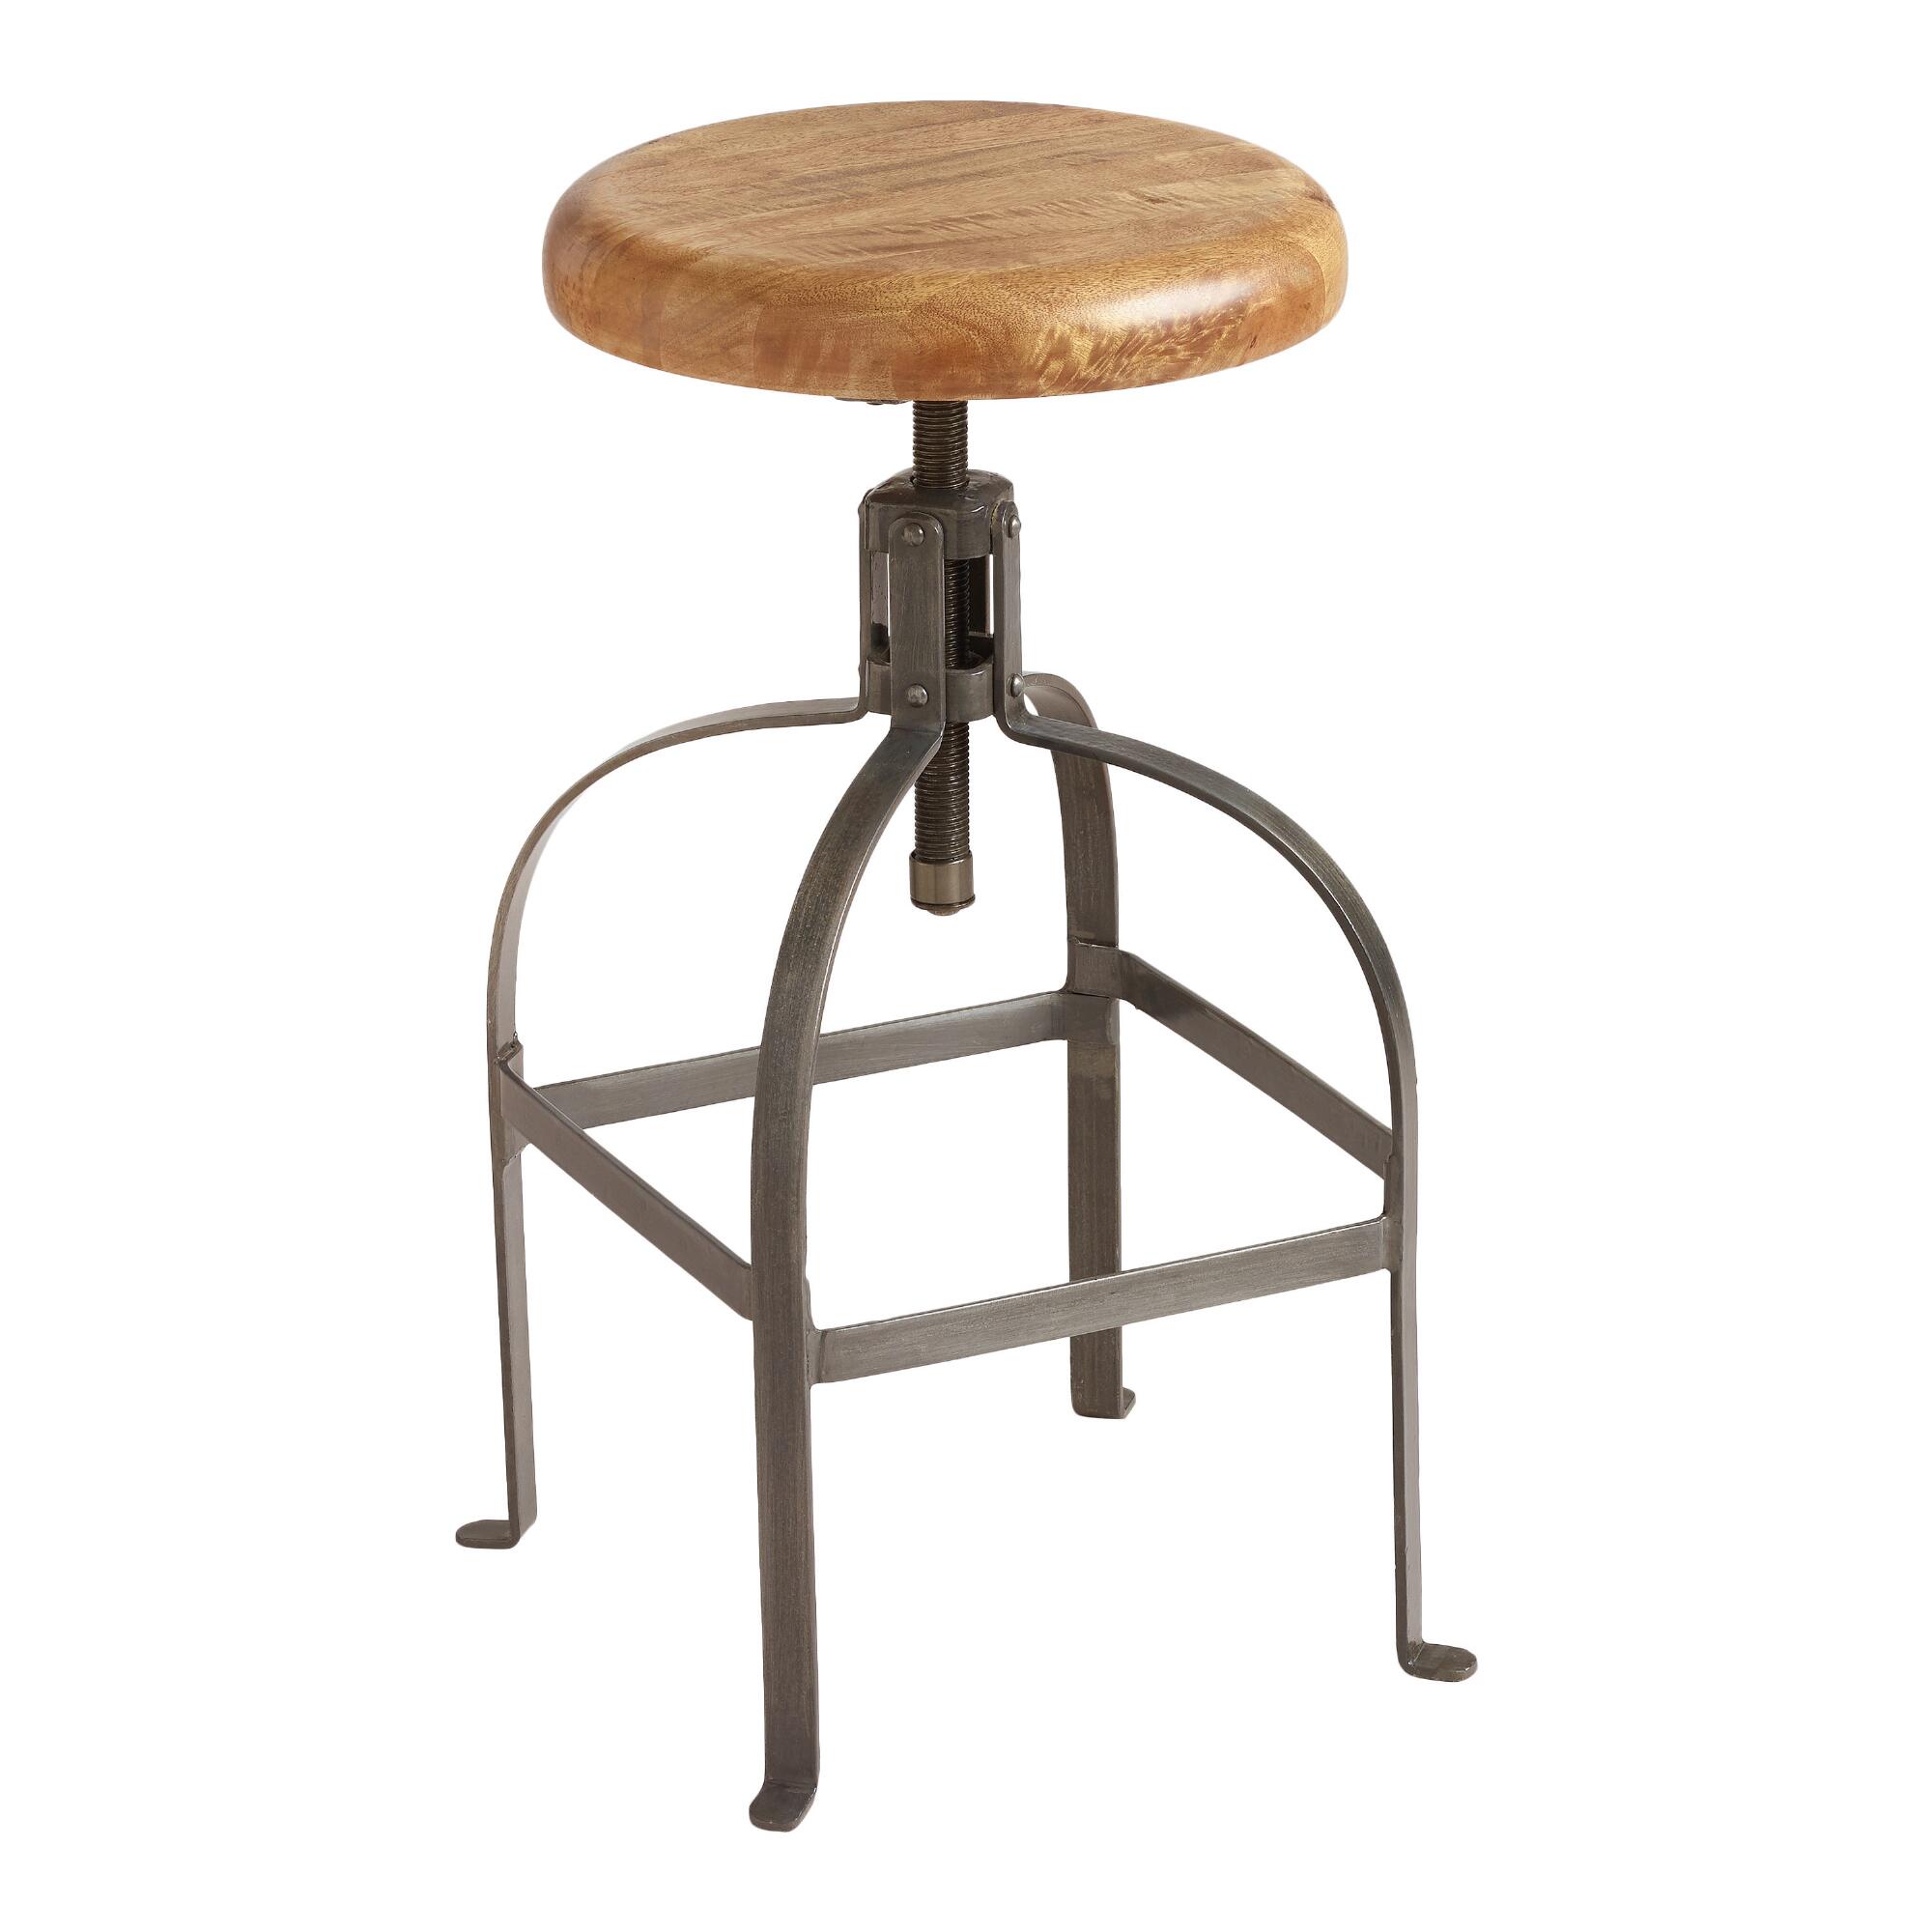 Round Wood and Metal Adjustable Stool by World Market